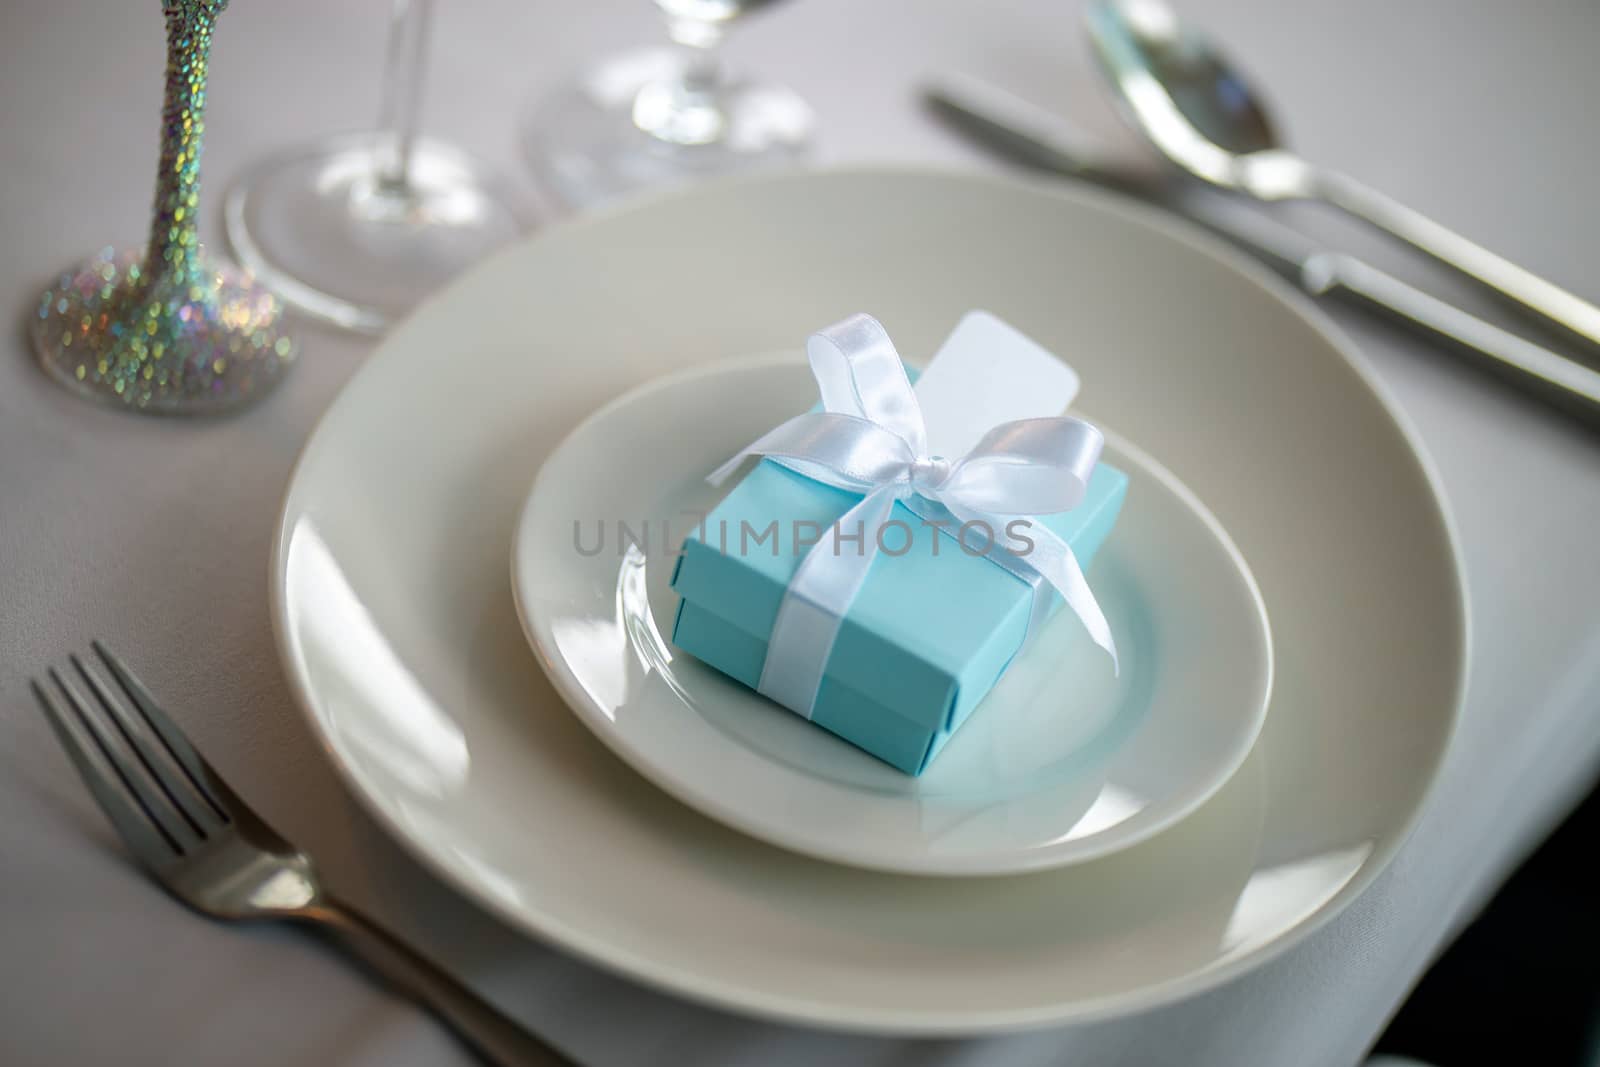 Festive table setting with handmade gift box on plate. Light blue handmade gift box in plate and fork on wedding table.